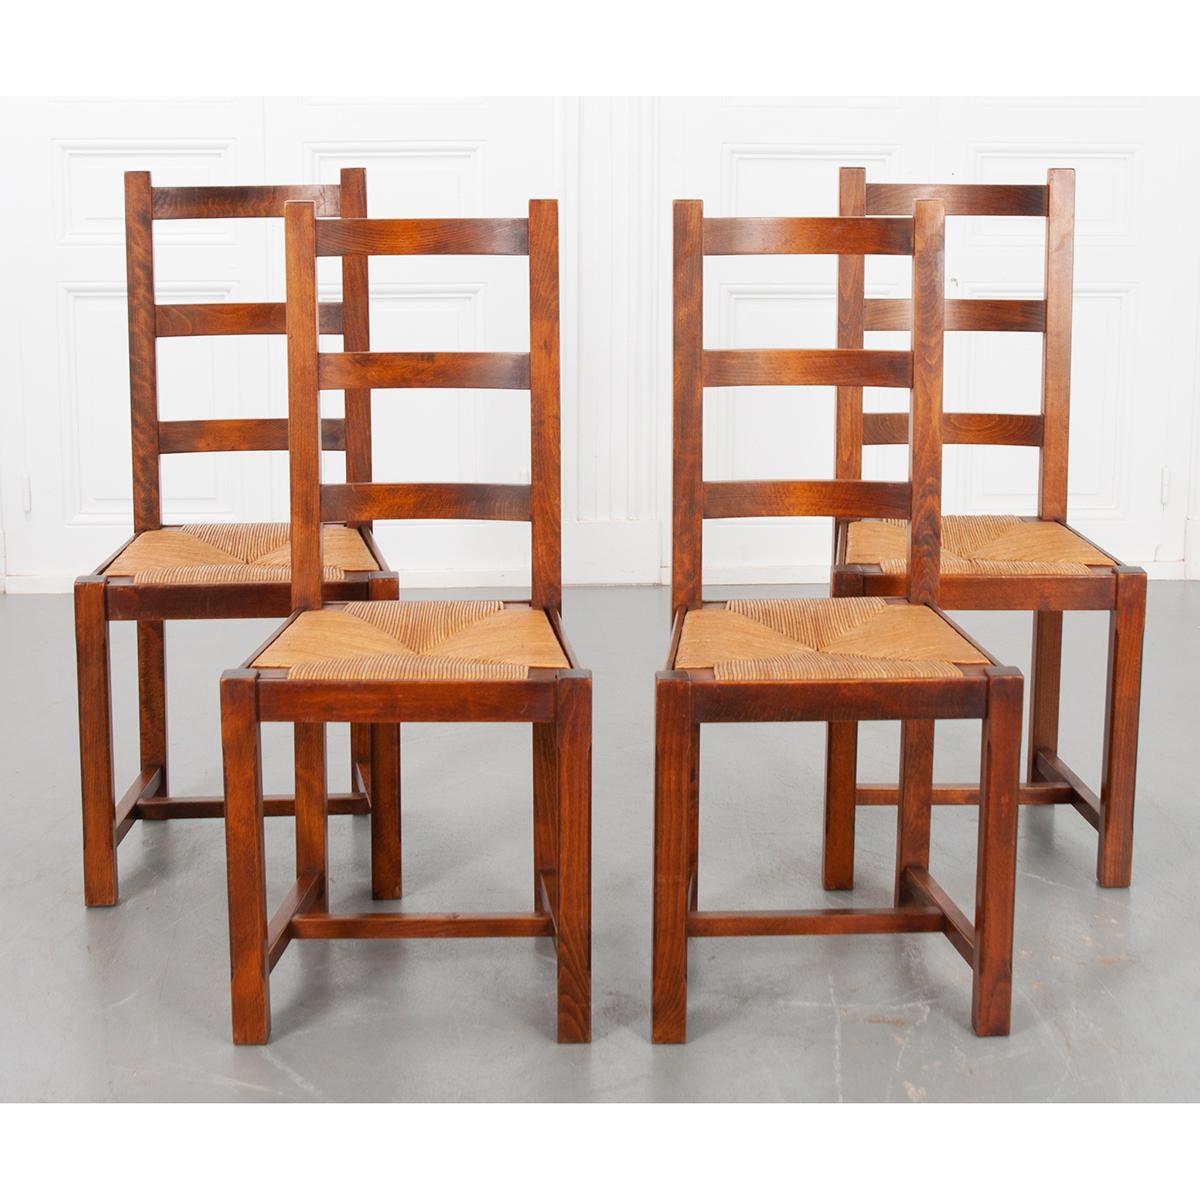 Other French Solid Oak Rush Seat Chairs